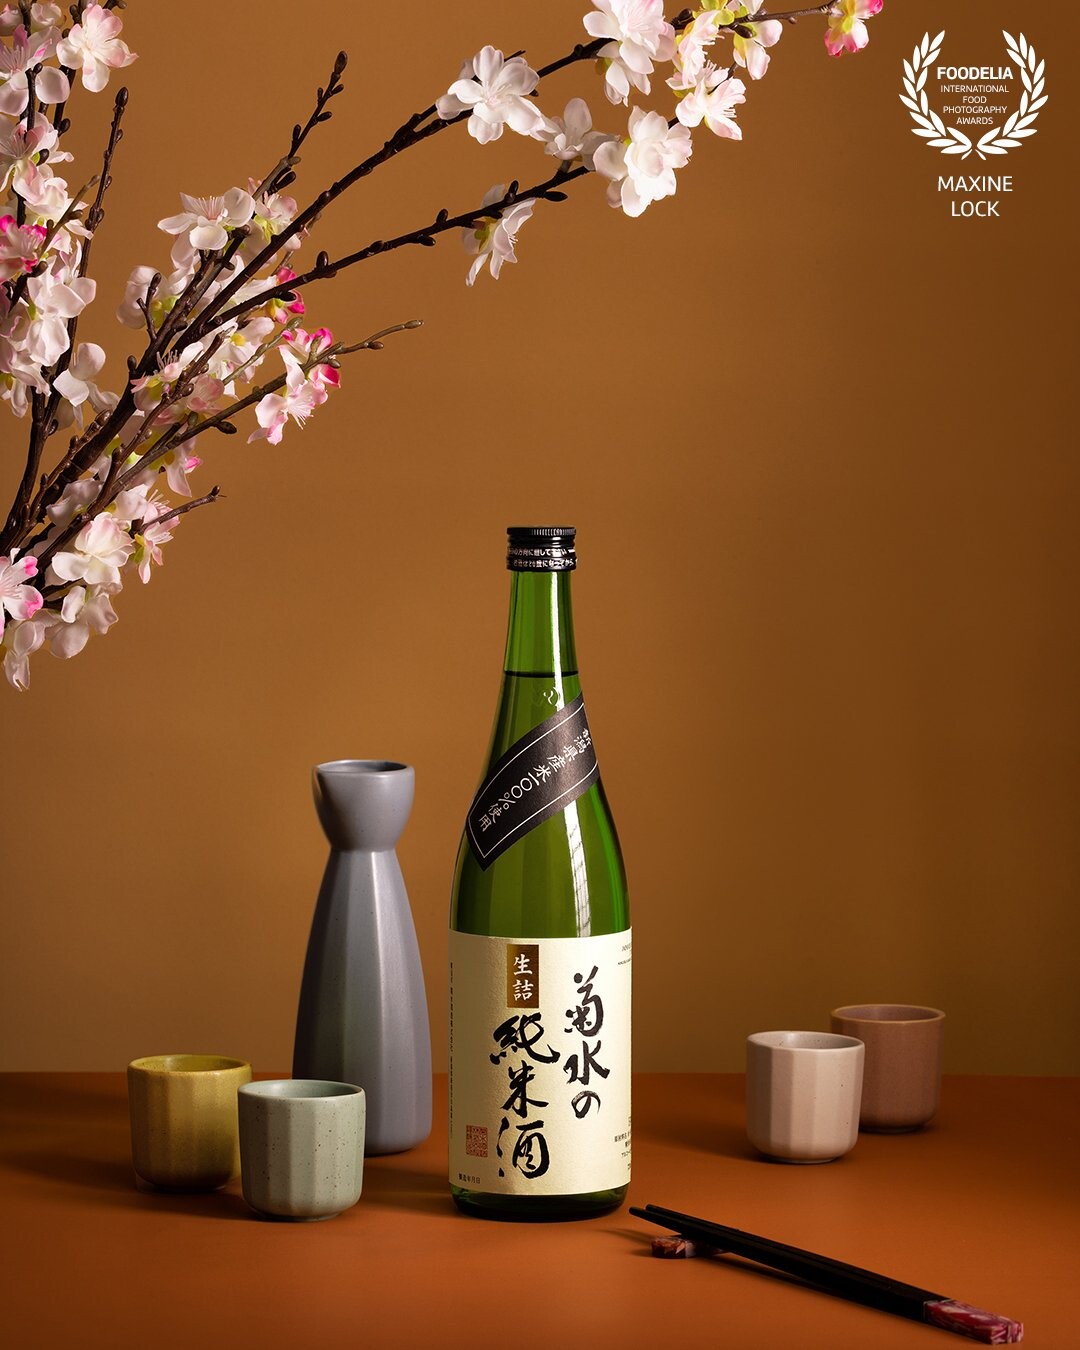 A beautiful bottle of sake with a set of sake vessel and cups used as props in the image. Sakura flowers added into the scene for some depth and interest.